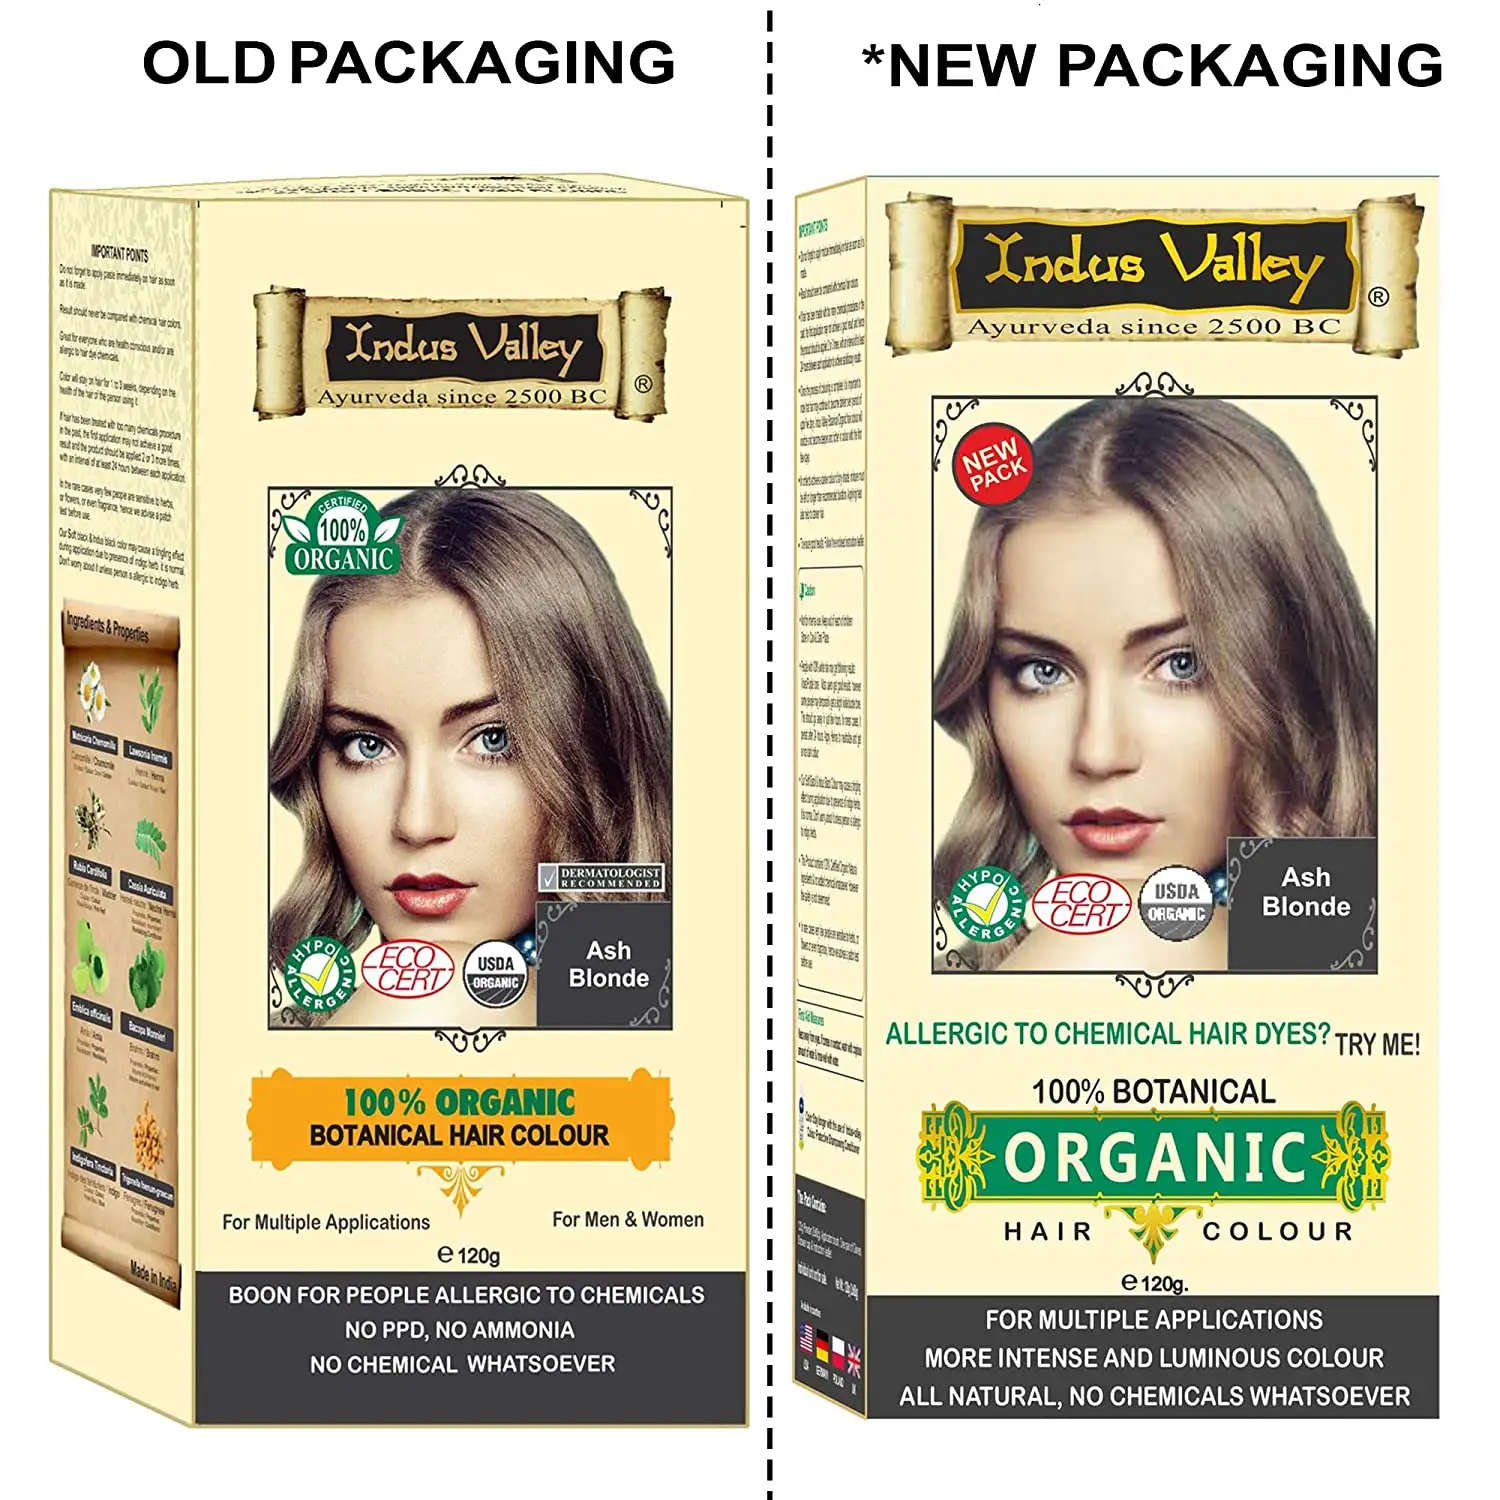 Indus Valley 100% Botanical Organic Hair Color Ash Blonde Combo Set of 2 for Sensitive Skin Hot Sale Open for Private Label OEM